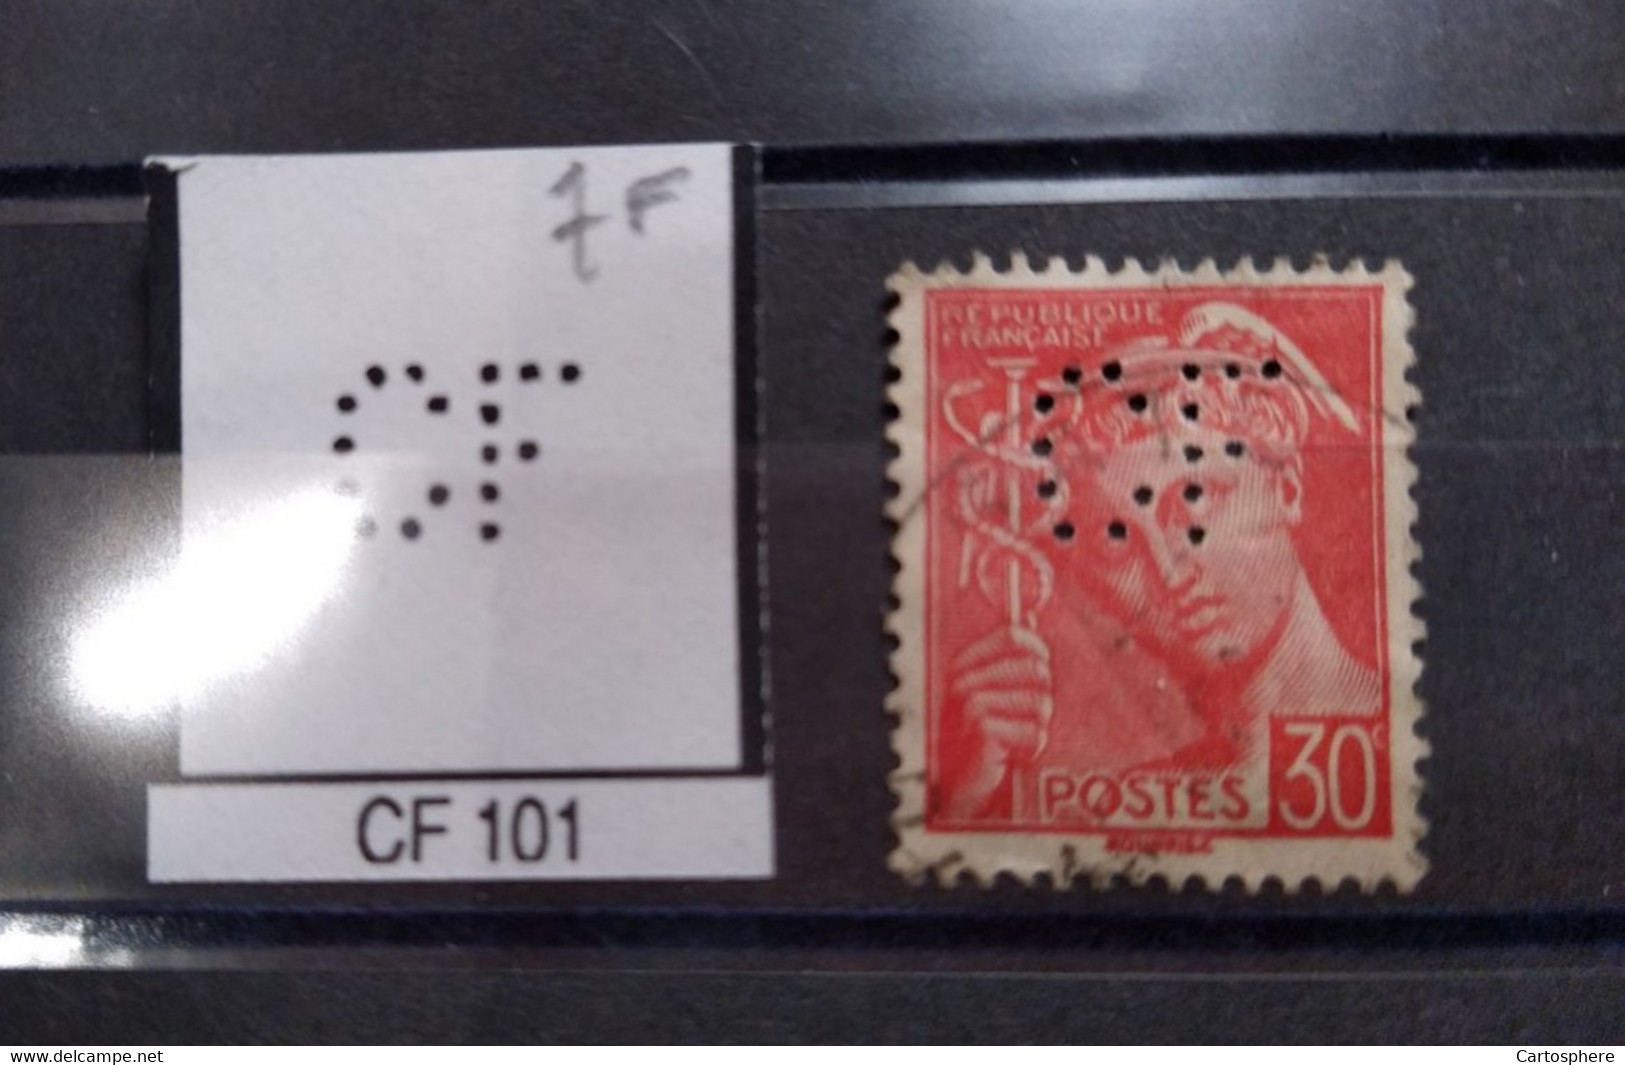 FRANCE TIMBRE CF 101 INDICE 7 SUR MERCURE PERFORE PERFORES PERFIN PERFINS PERFO PERFORATION PERFORIERT - Used Stamps